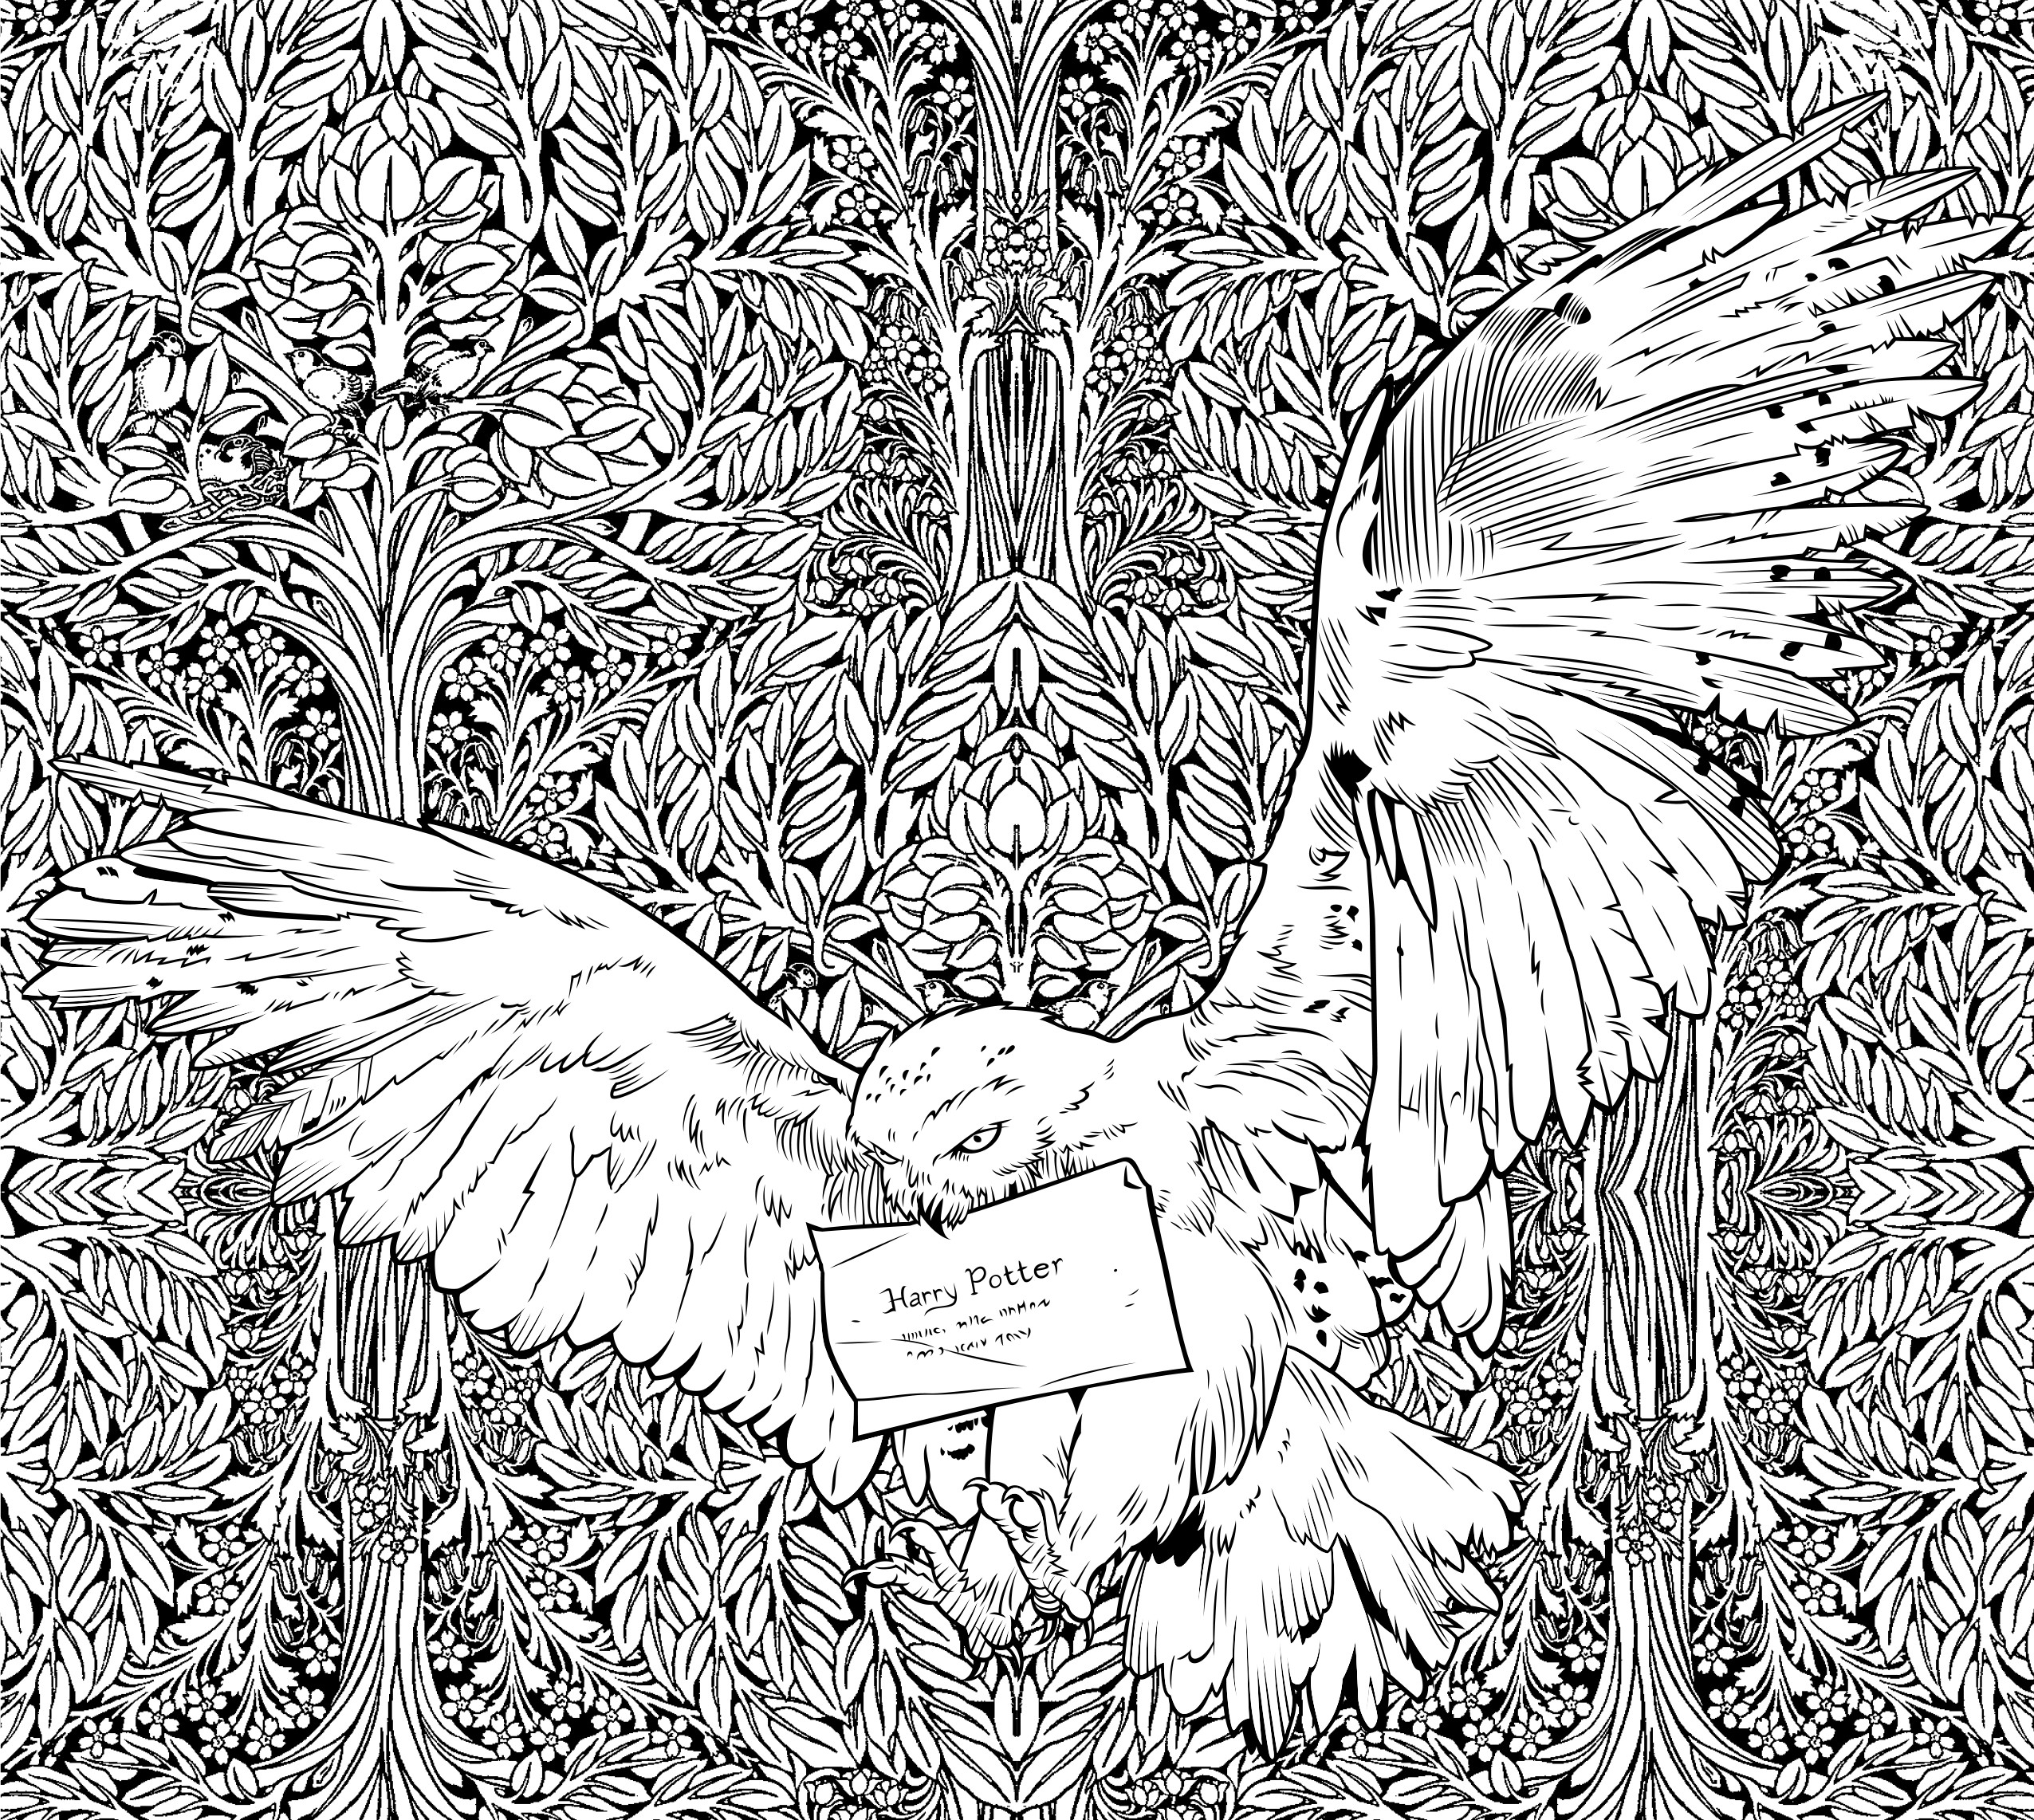 Harry Potter Coloring Pages For Adults
 Get a Sneak Peek of the New Harry Potter Coloring Book